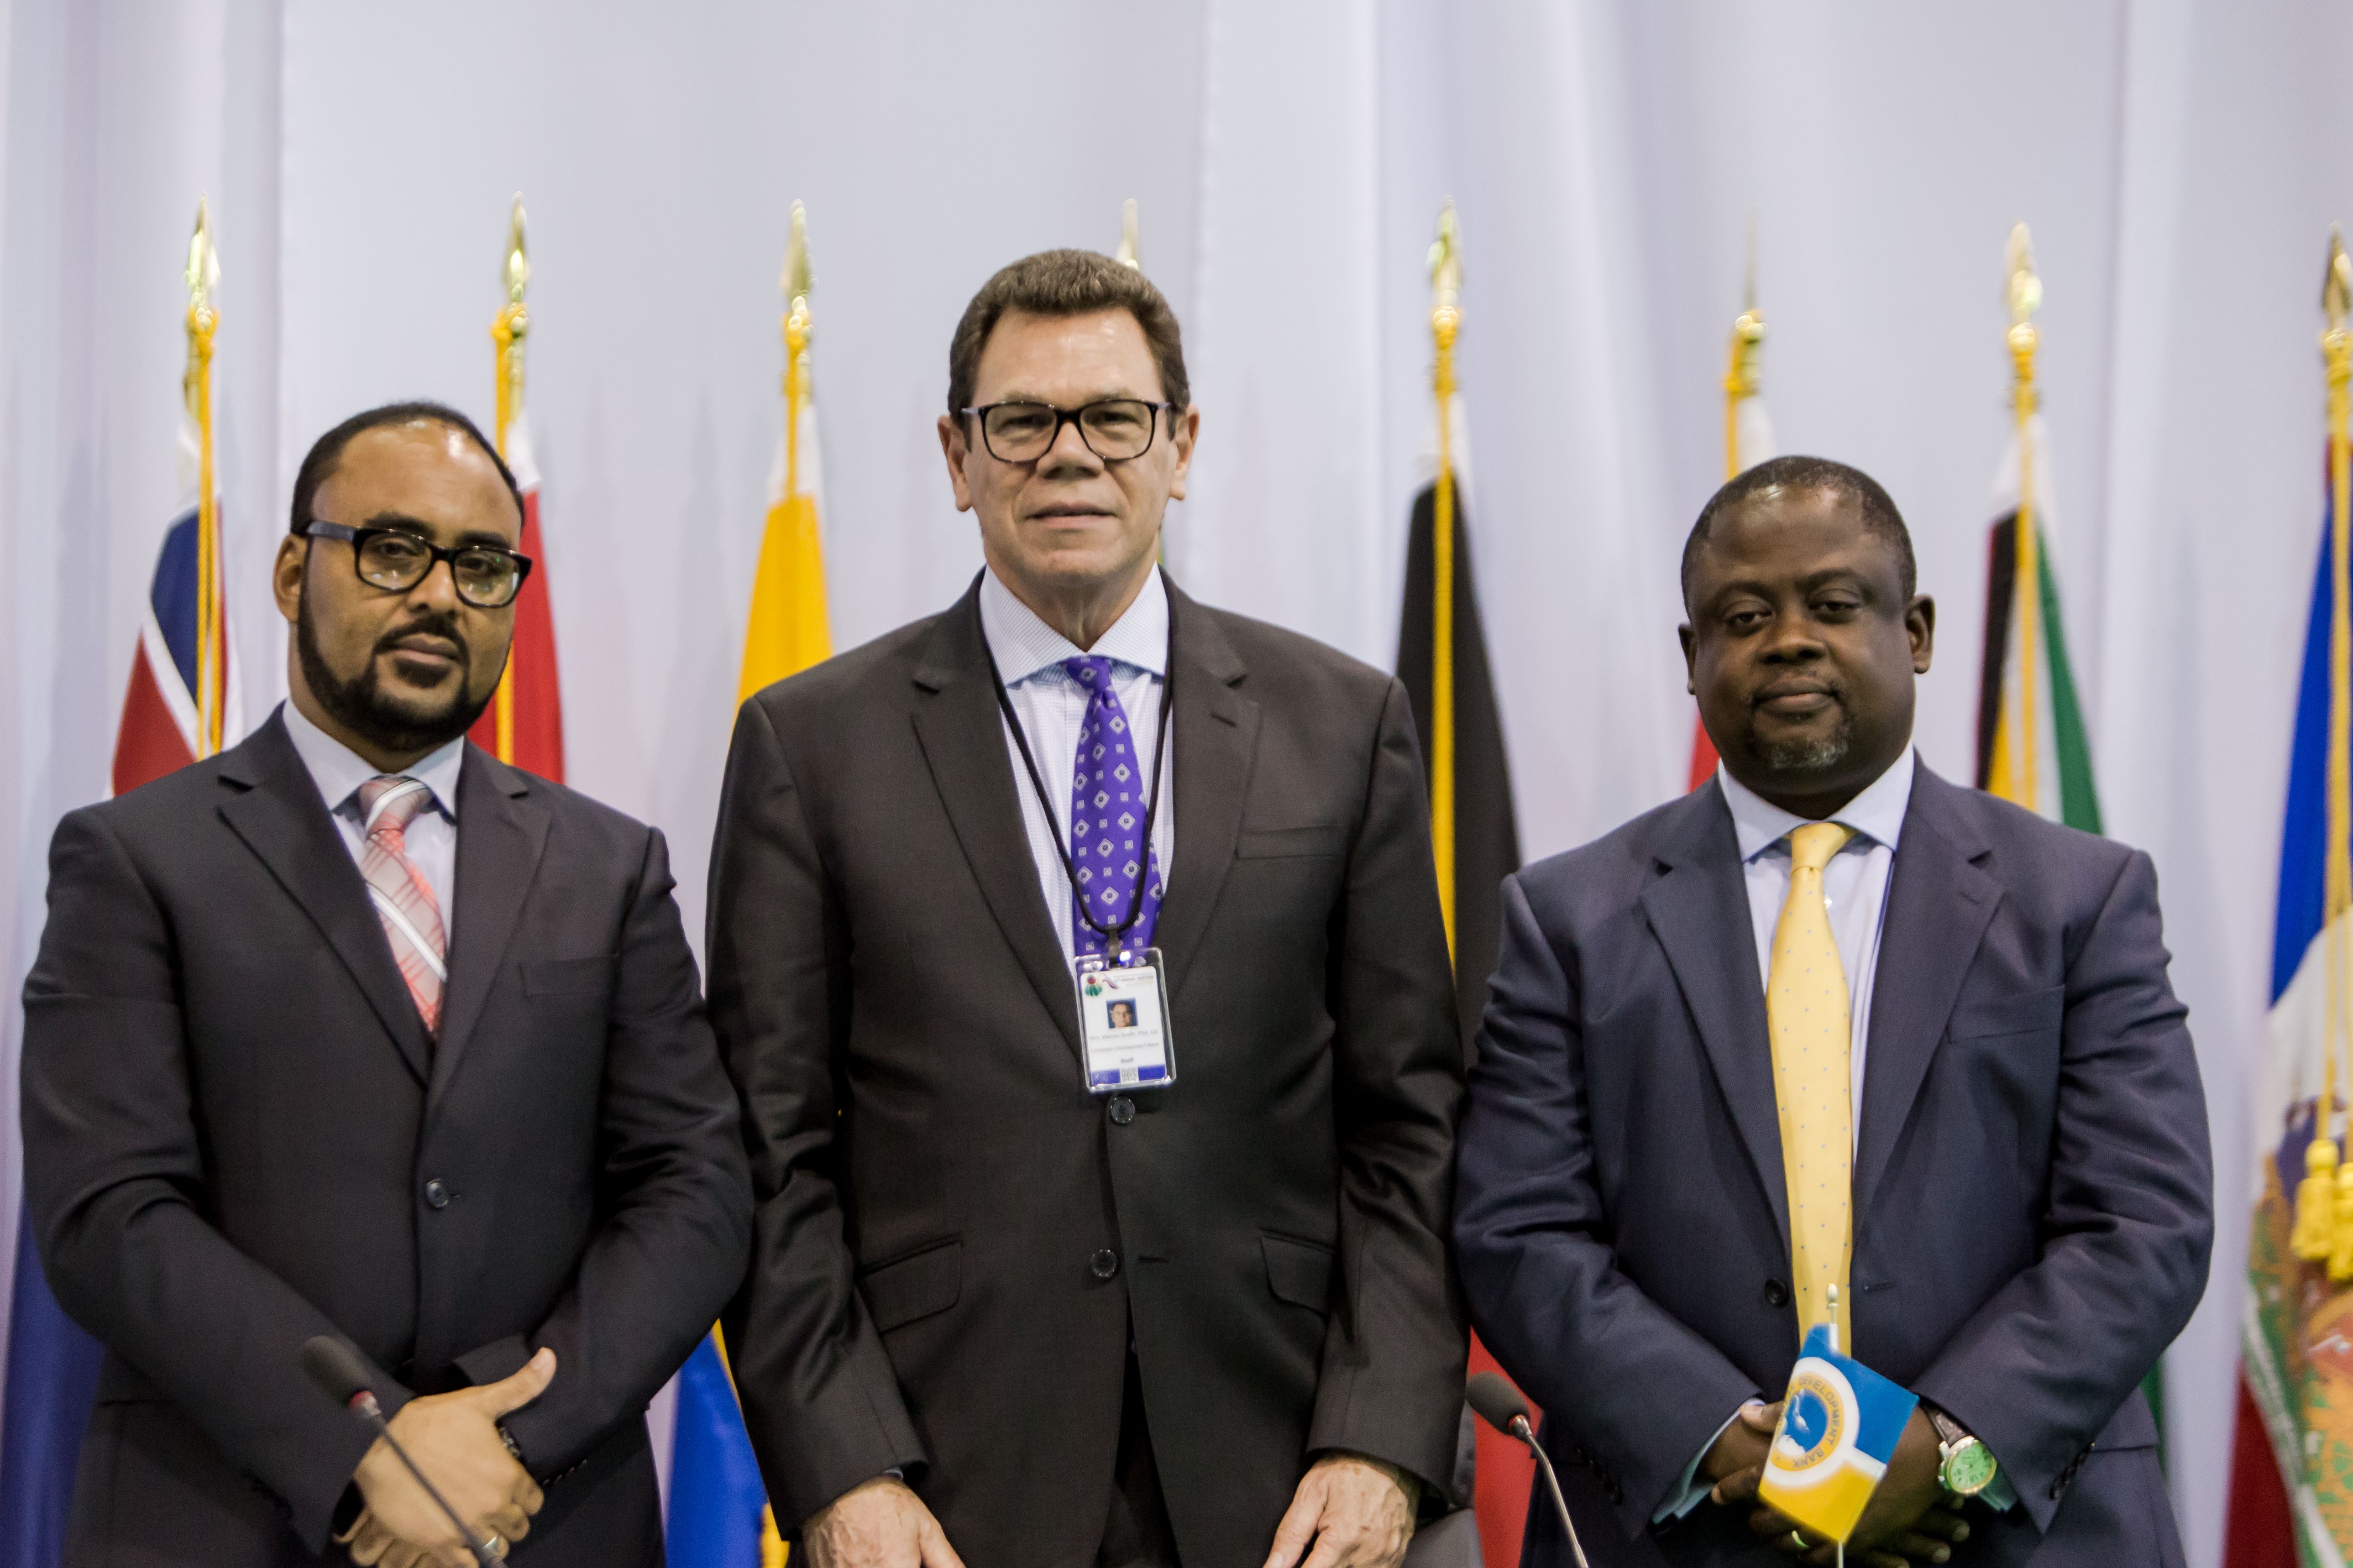 Left to right: Anthony Isaac, CEO, CCRIF SPC; Dr. William Warren Smith, President, CDB and Malcolm Buamah, Chief Risk Officer, CDB after launching the Integrated Sovereign Risk Management in the Caribbean Project in Providenciales on May 25, 2017.